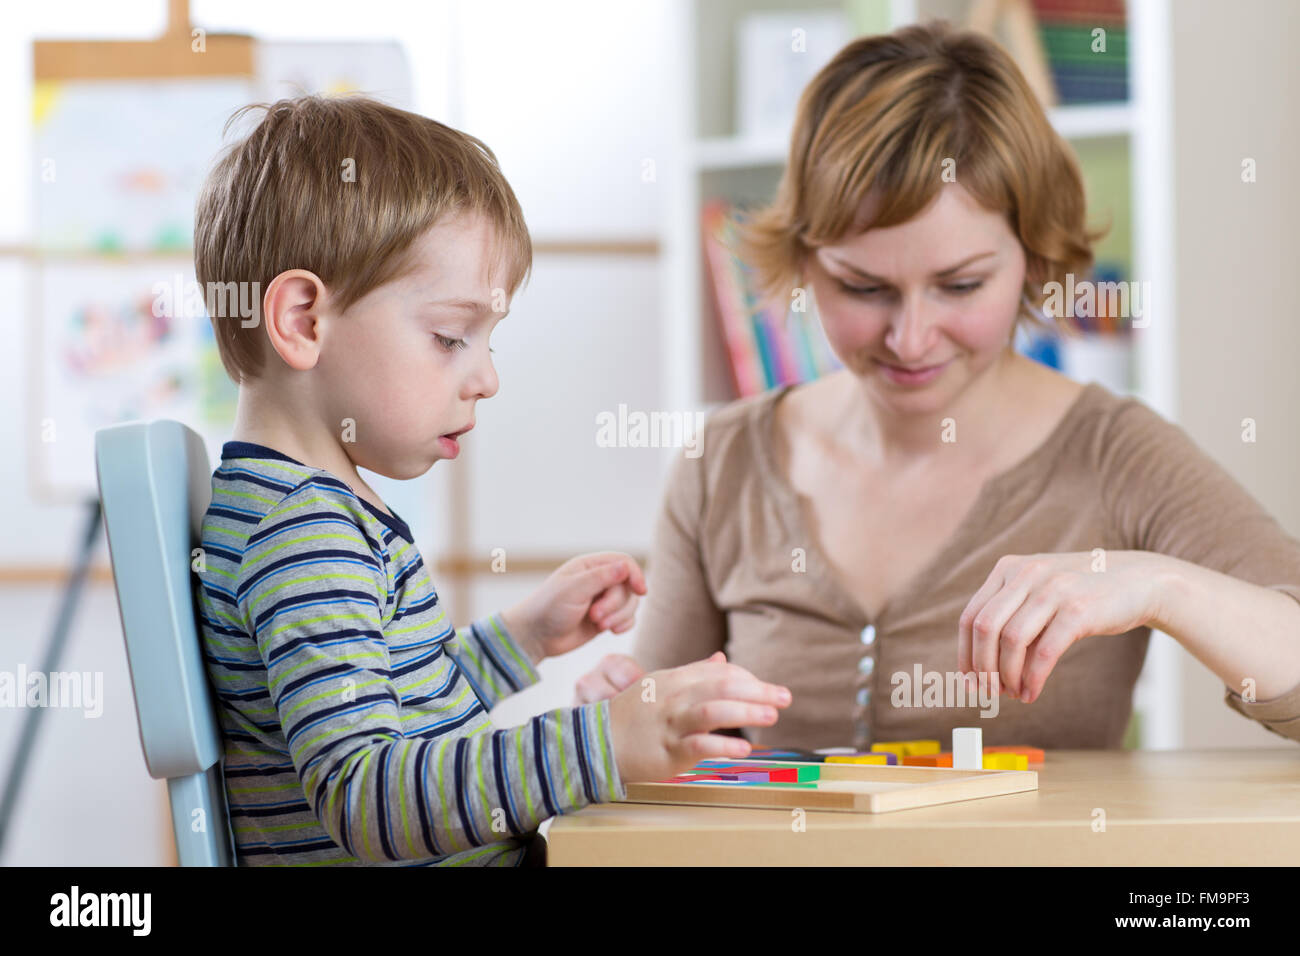 Child boy playing with education toys at the table in kindergarten Stock Photo